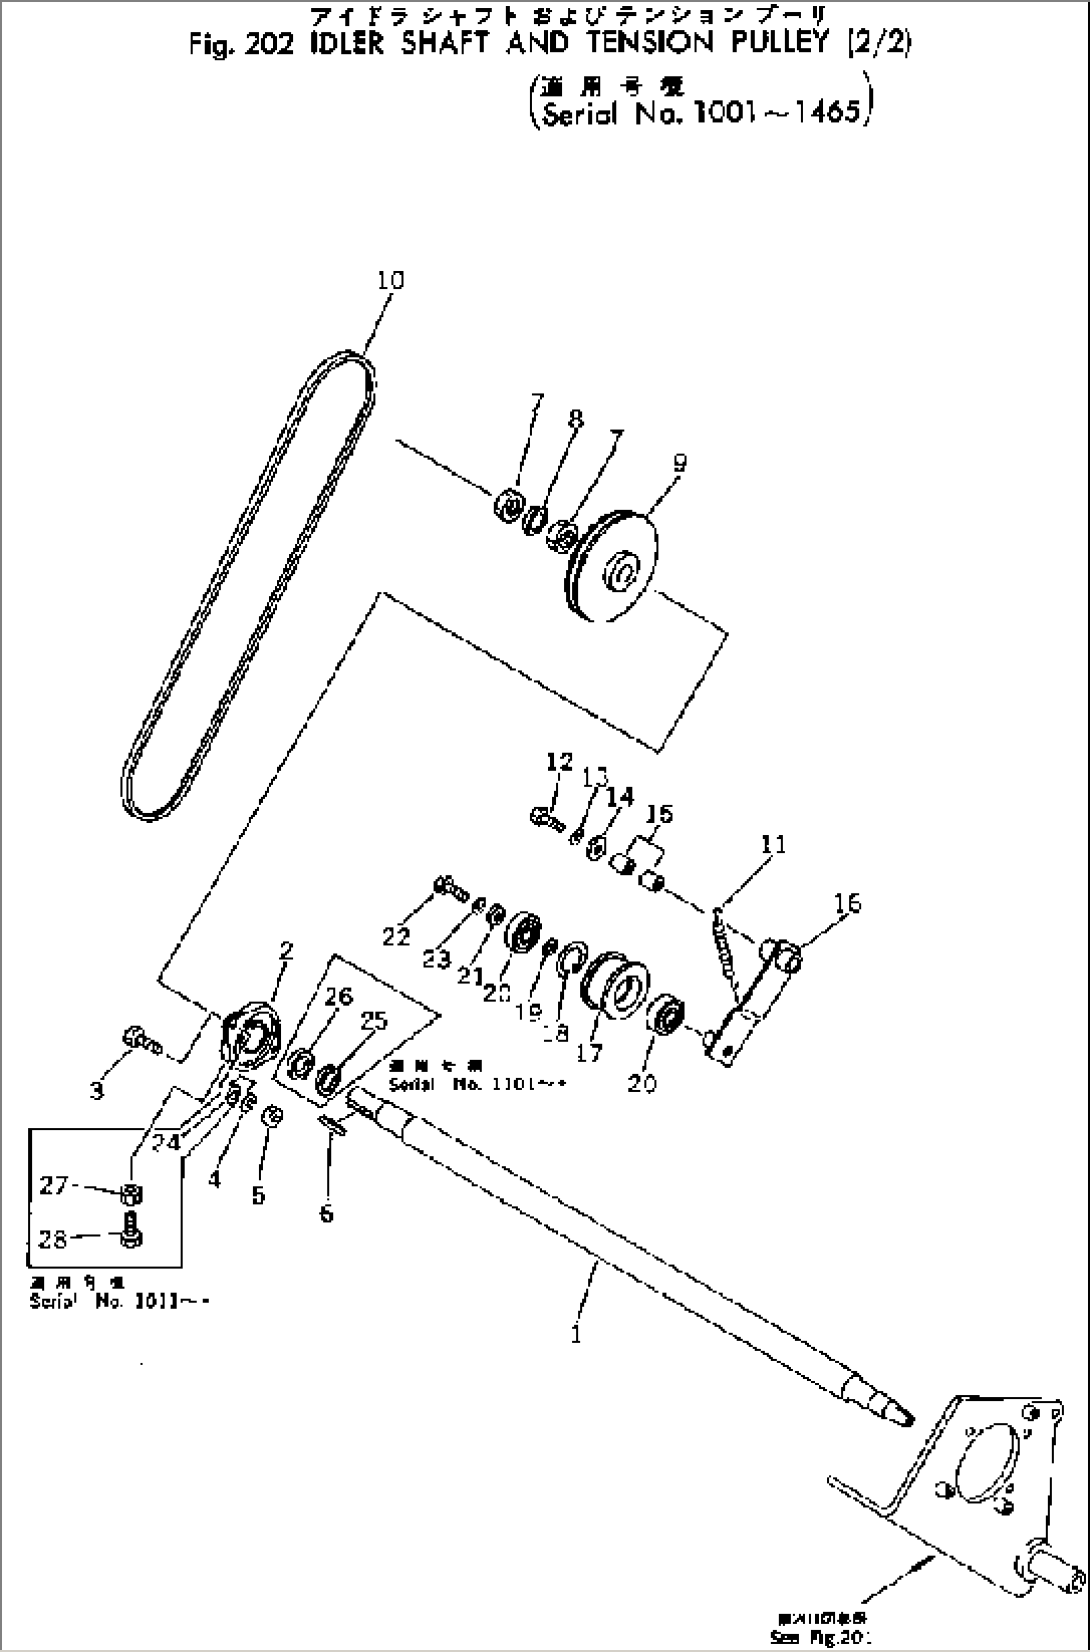 IDLER SHAFT AND TENSION PULLEY (2/2)(#1001-1465)